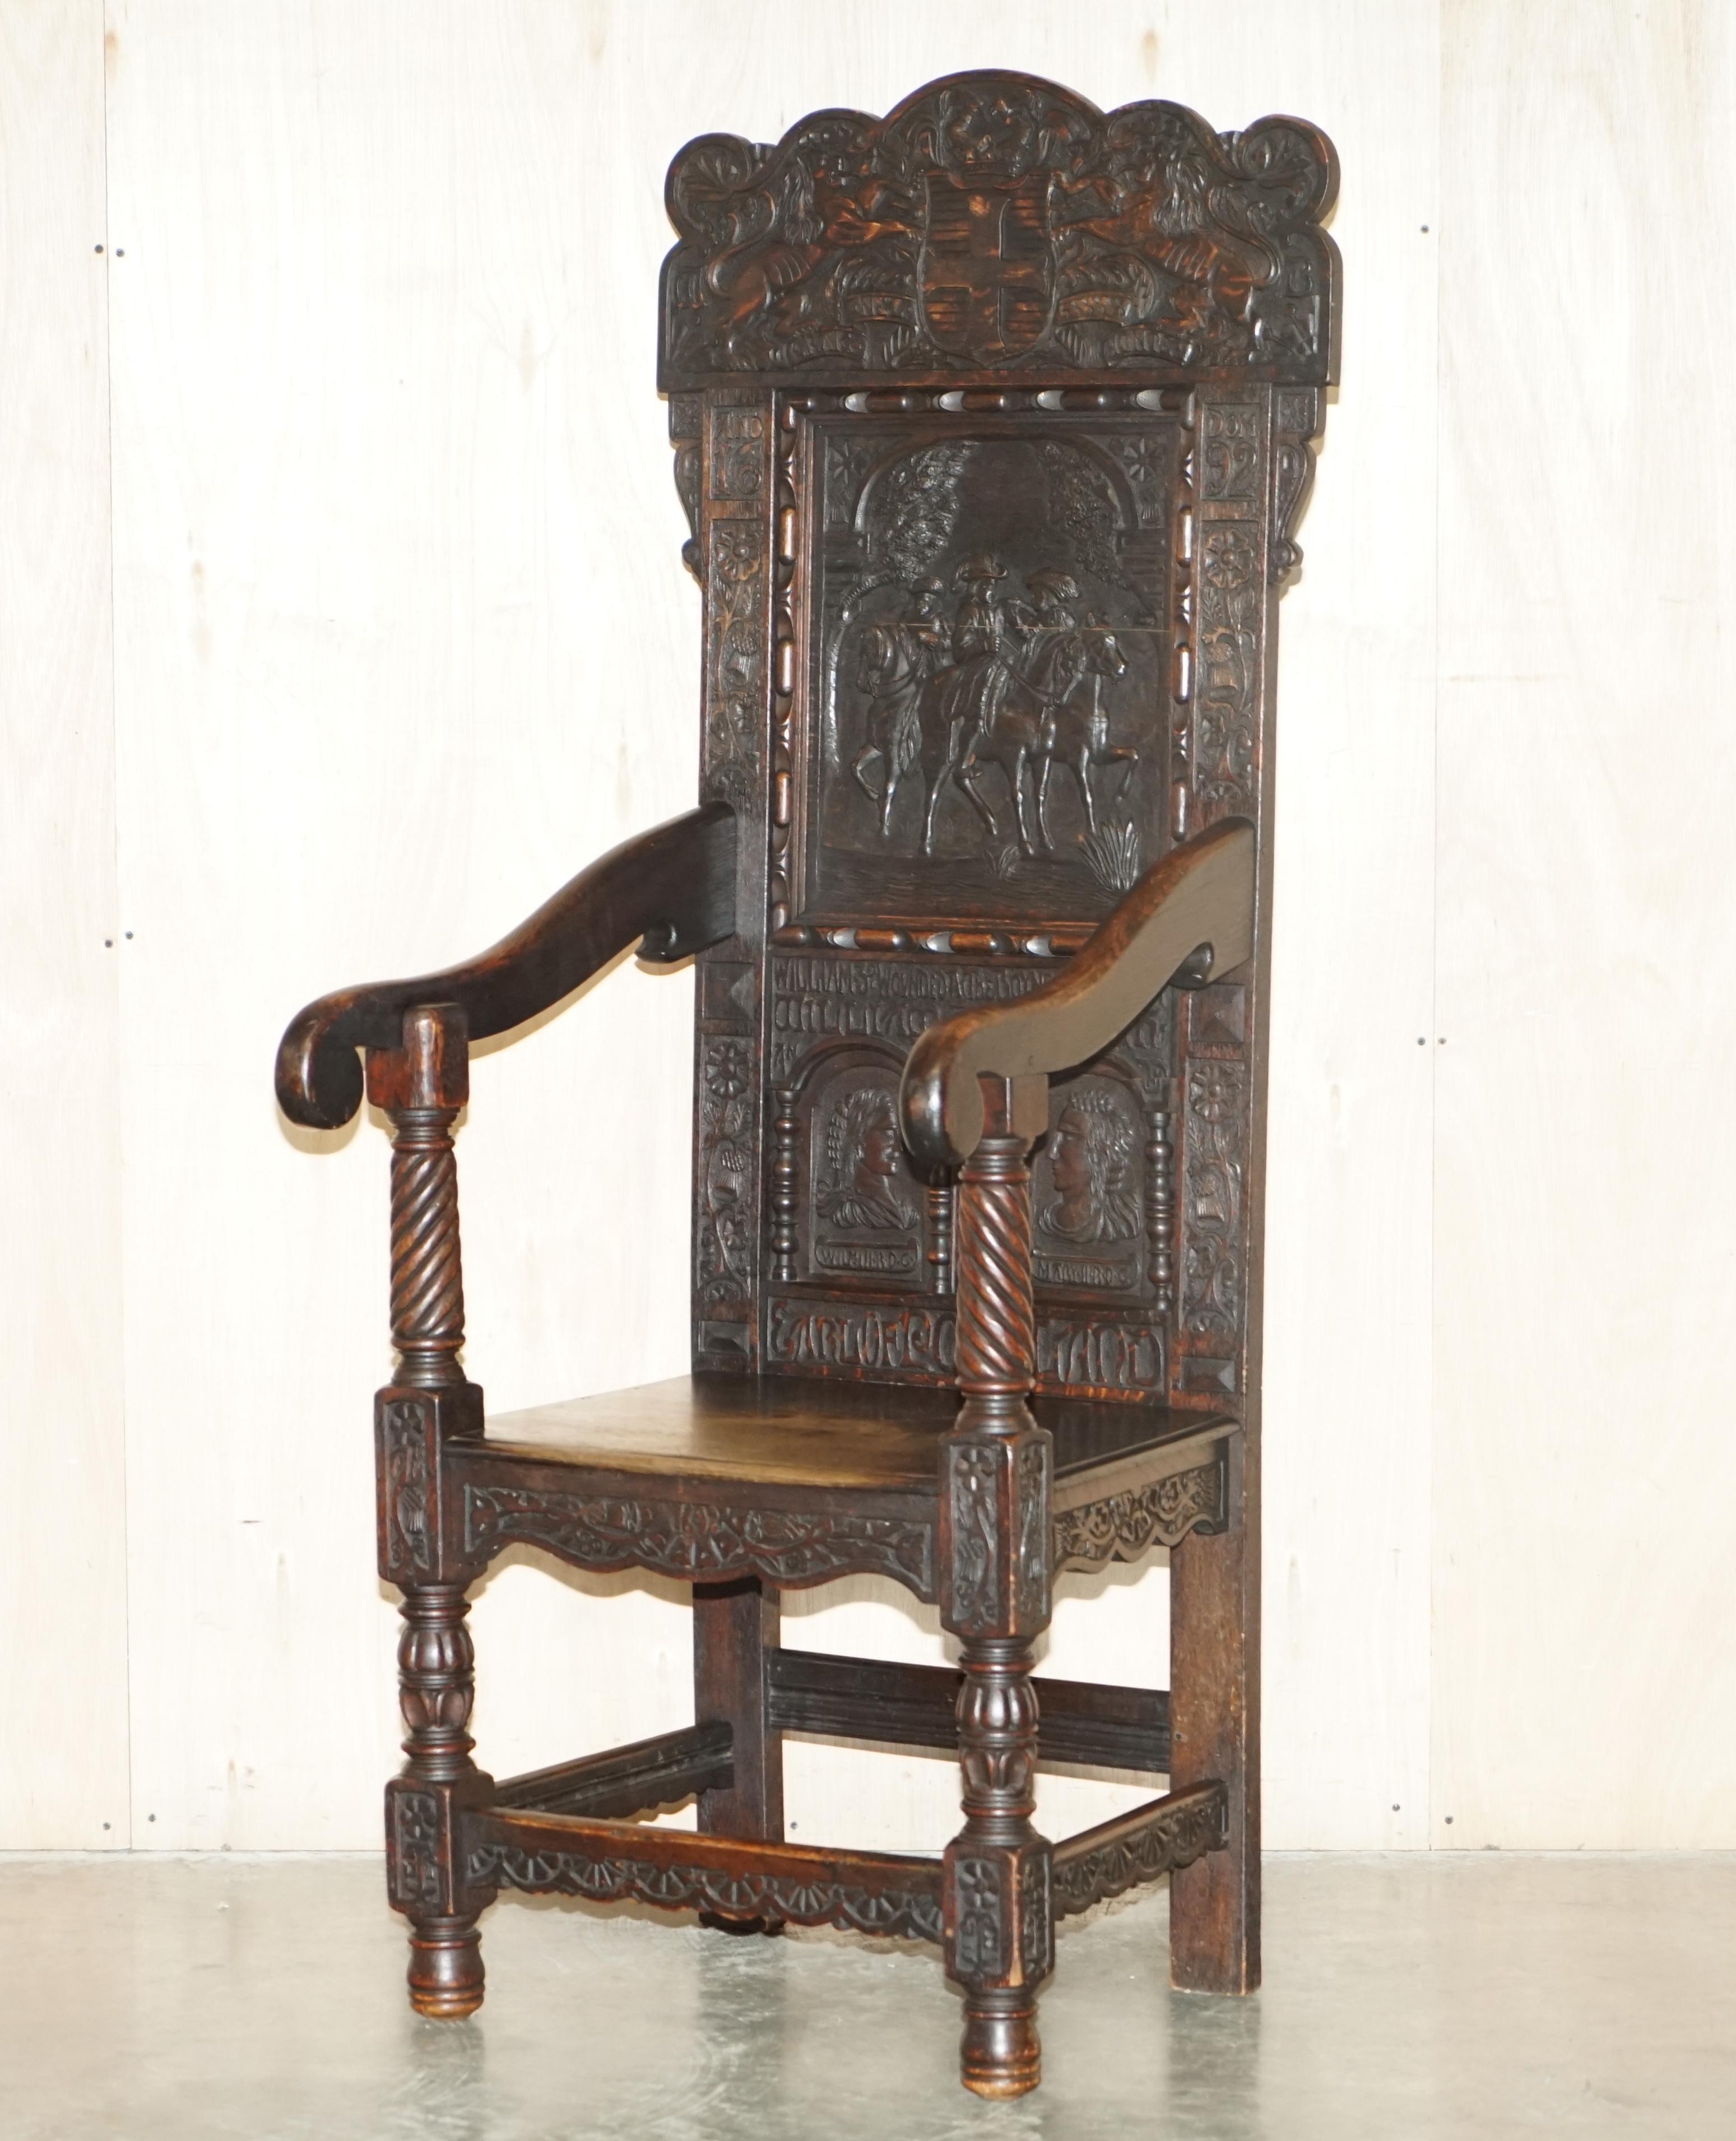 We are delighted to offer for sale this very interesting, 1690-1692 dated, extra large, hand carved, Wainscot armchair which commemorates the 1690 Battle of Boyne

Please note the delivery fee listed is just a guide, it covers within the M25 only